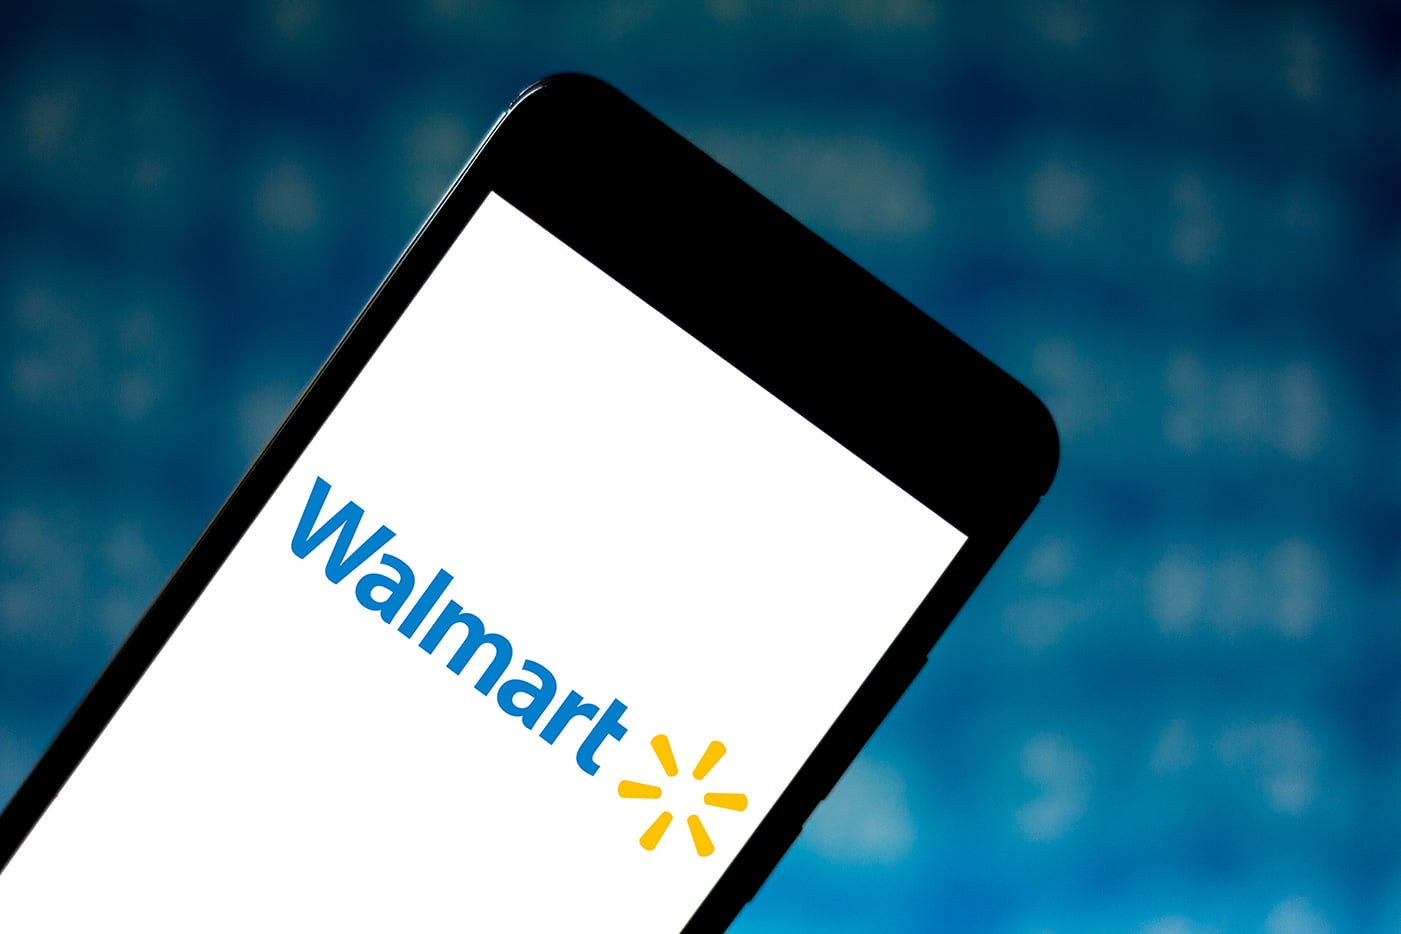 How To Get Free Walmart Gift Cards Fast - 3 Strategies That Work